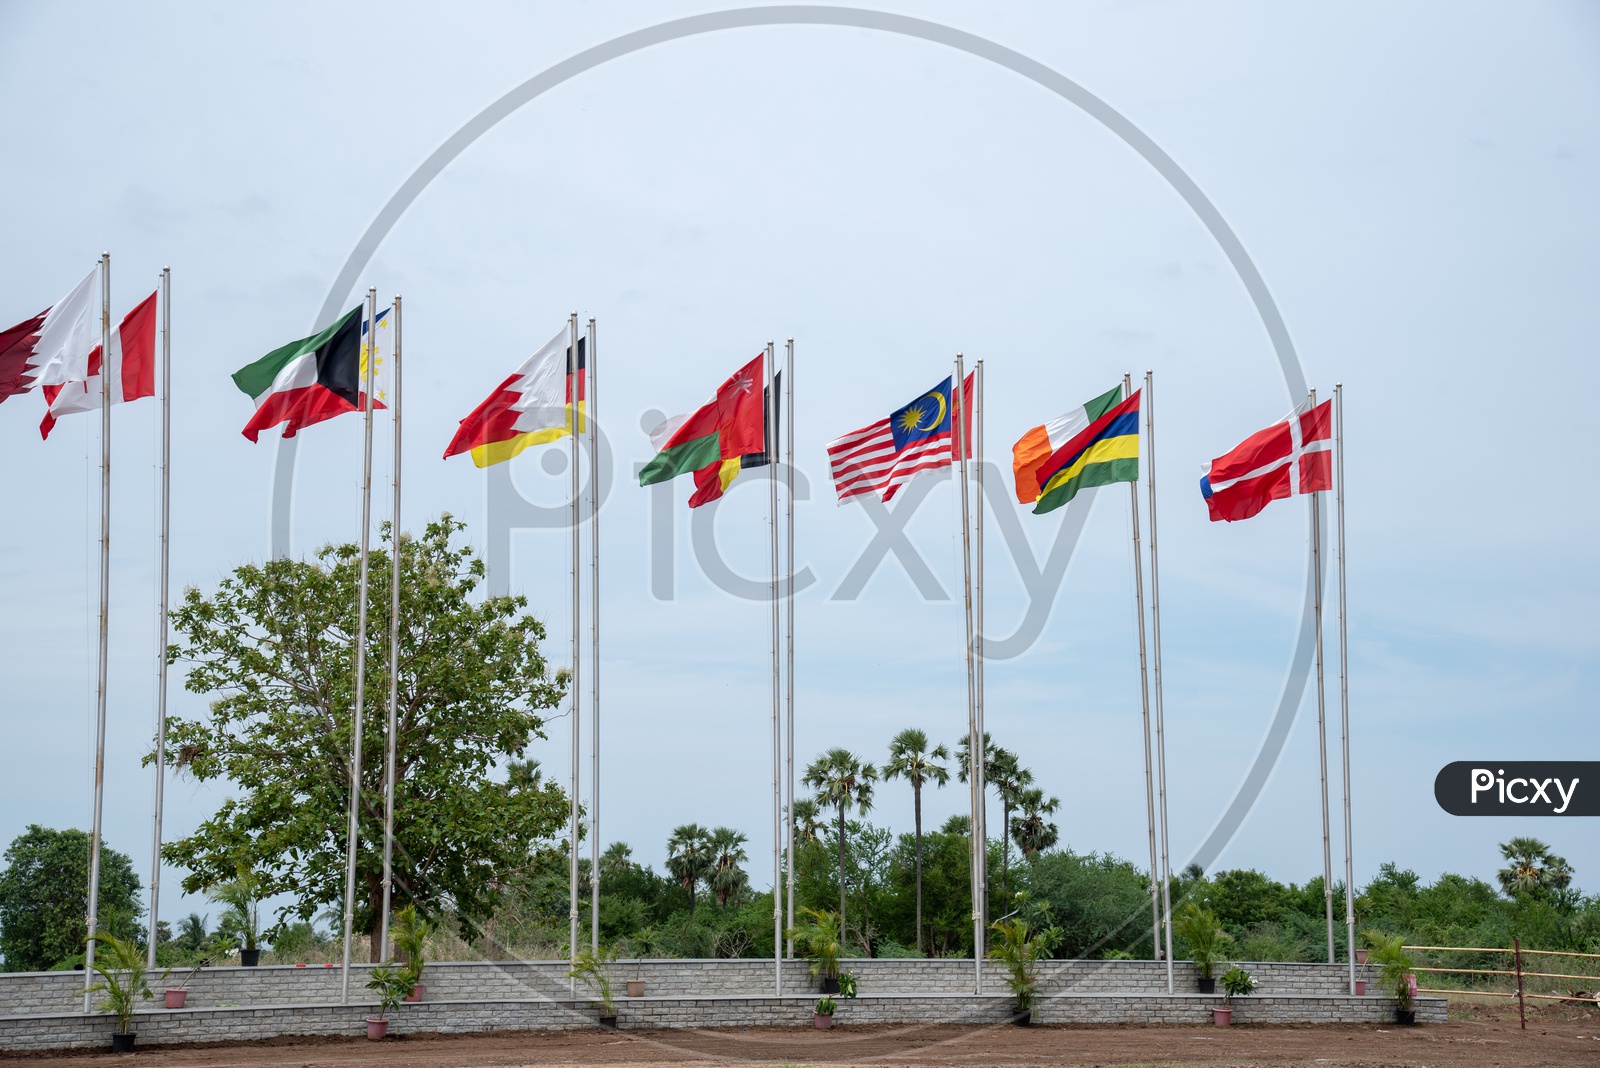 Flags of Different Nations representing Telugu NRI's working in respective Countries